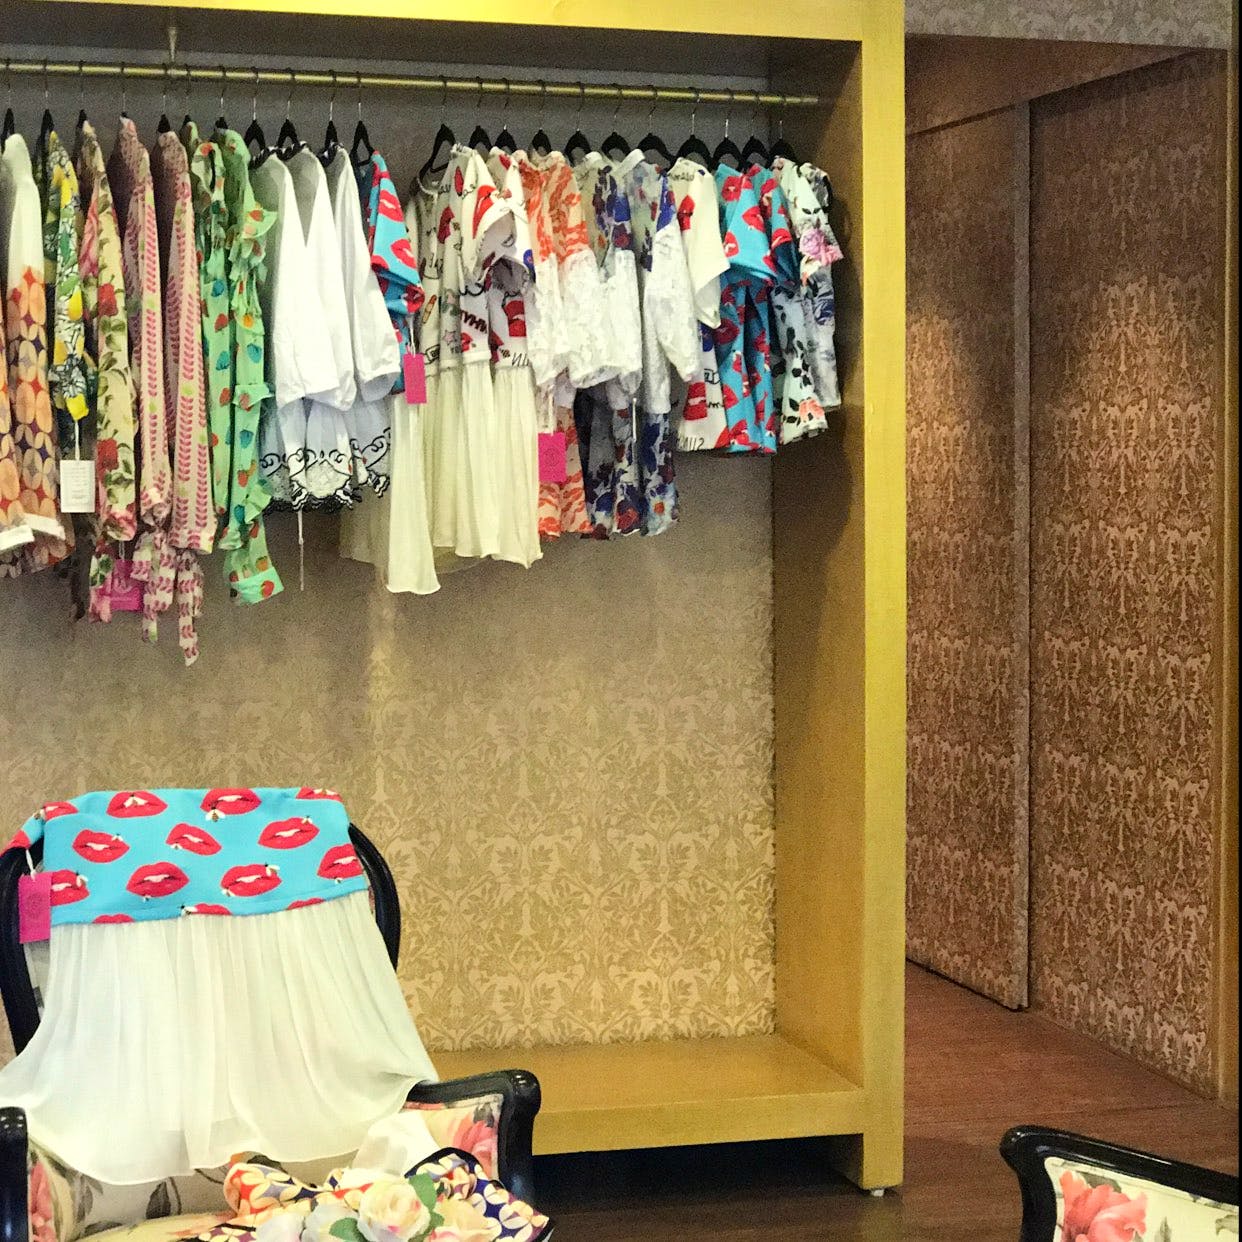 All Things Classy: We Found A Boutique That Caters To Your Fashion Needs